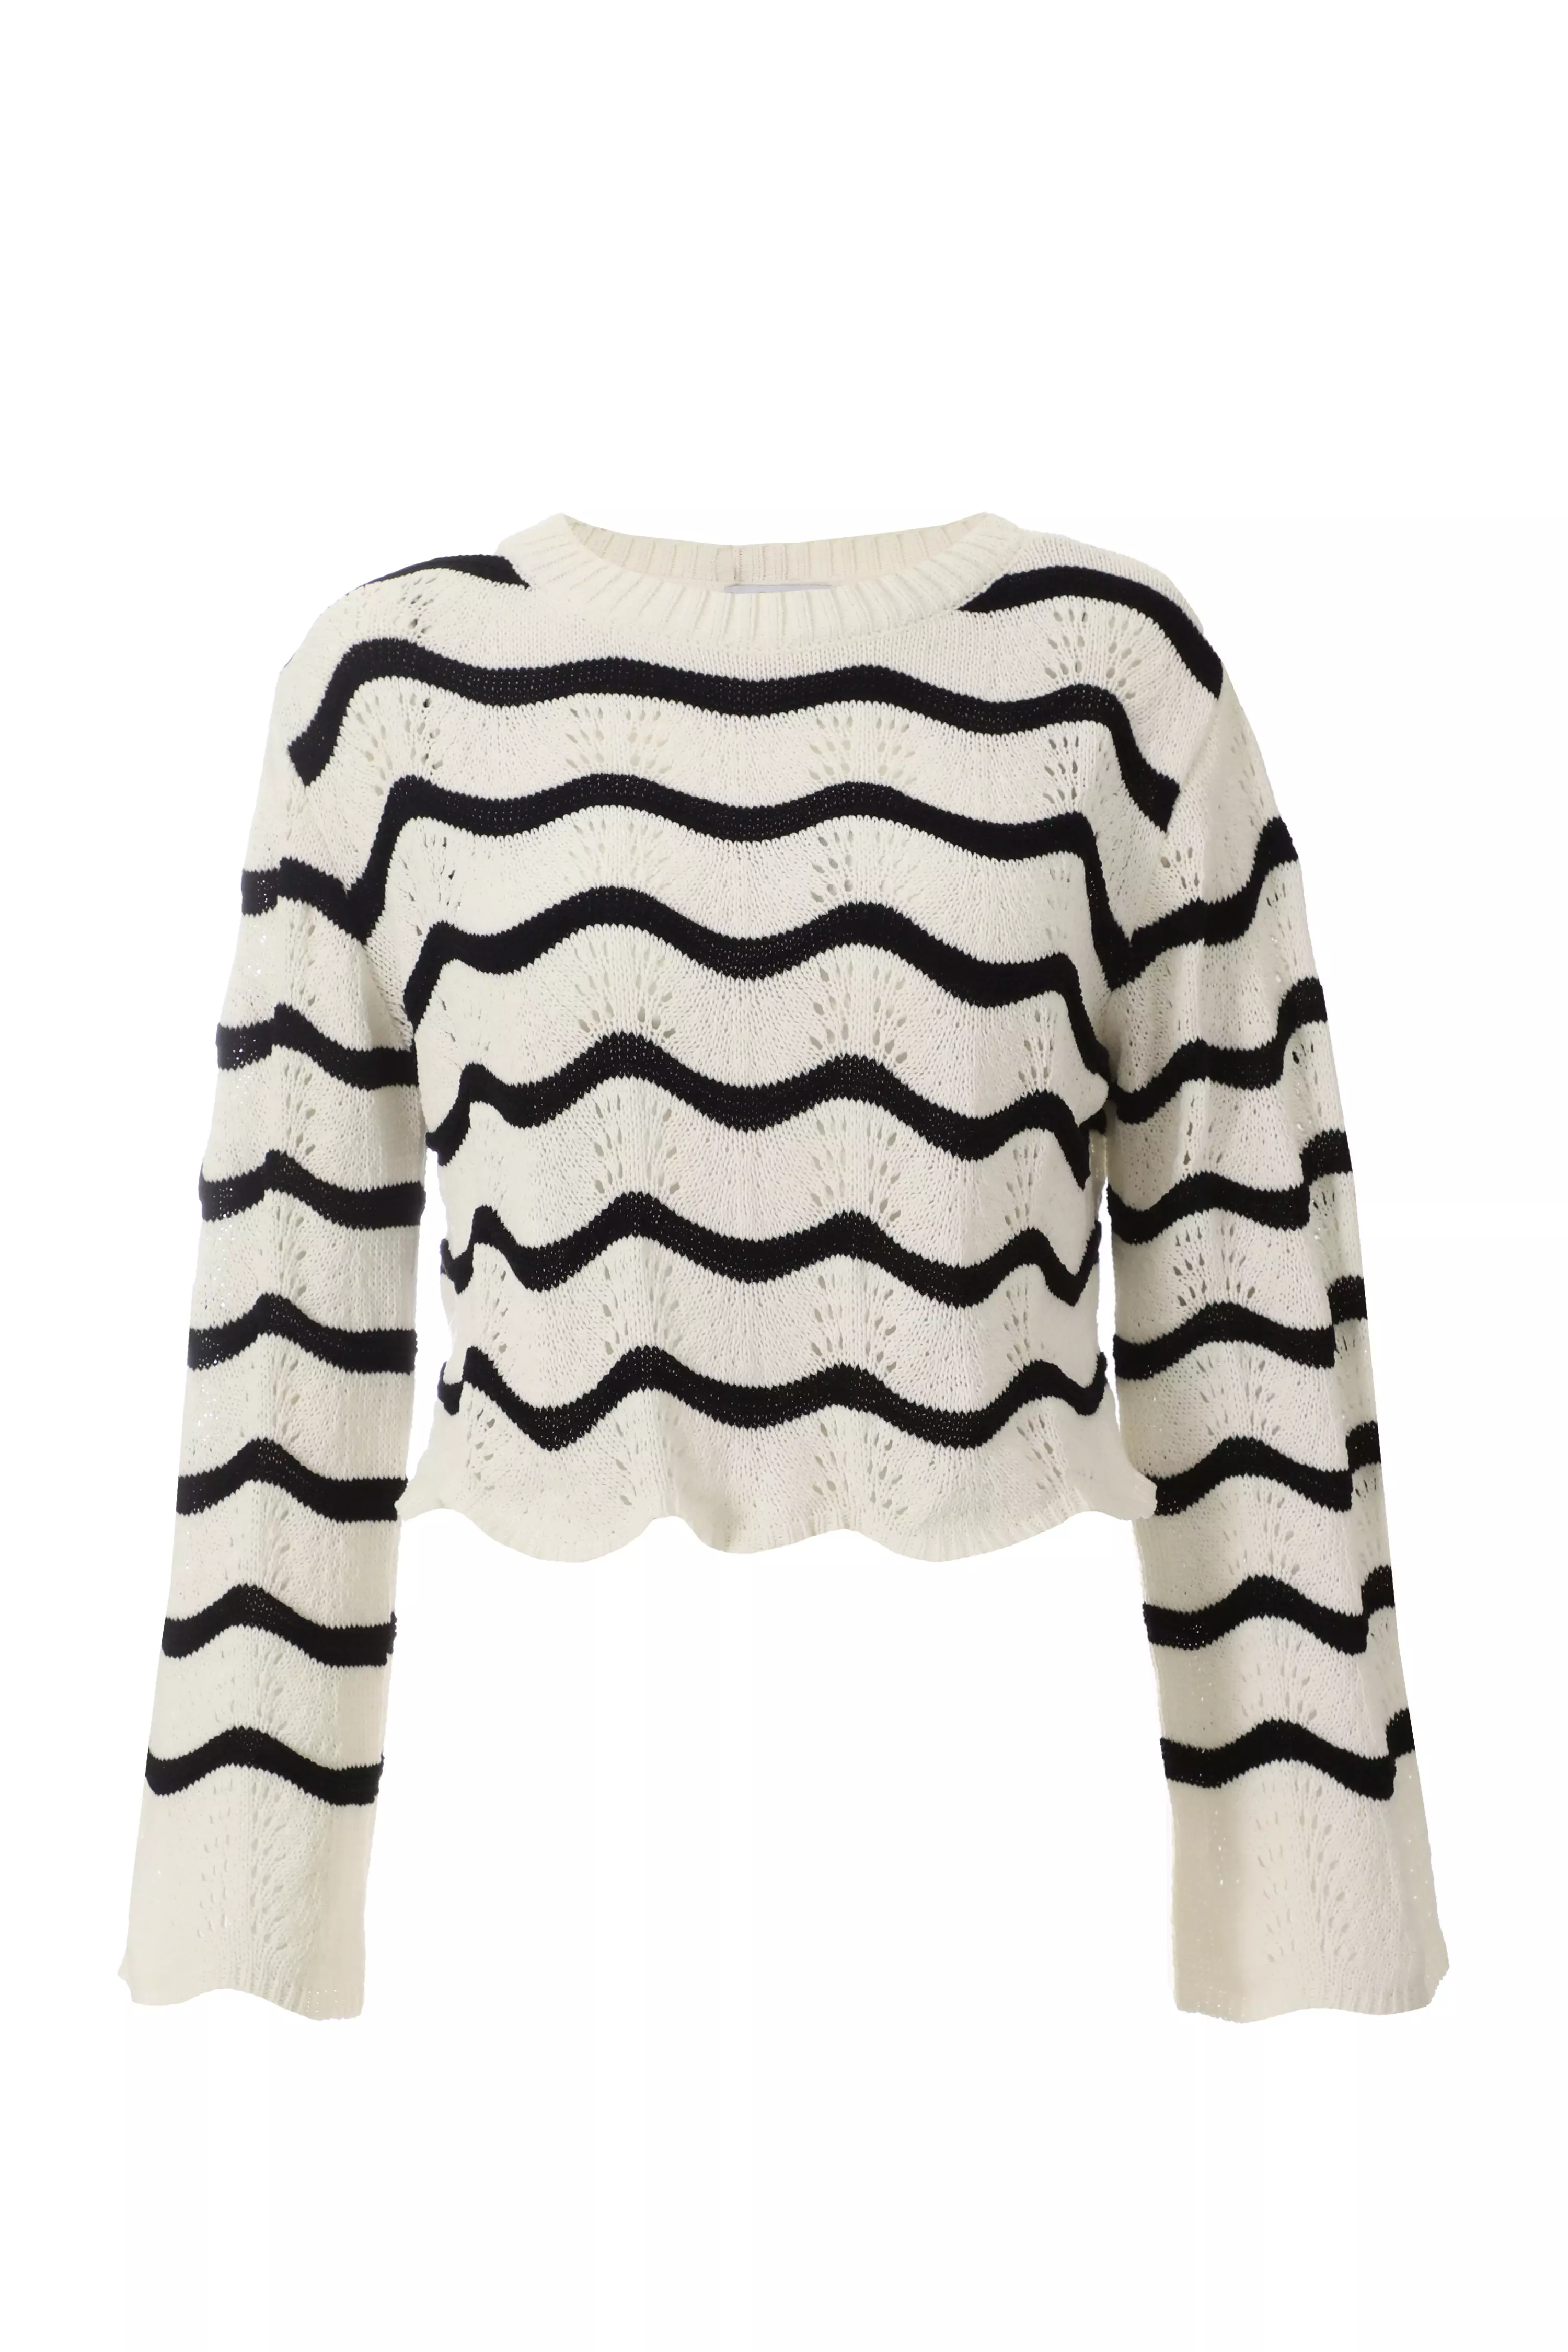 Black Wavy Print Knitted Cropped Jumper